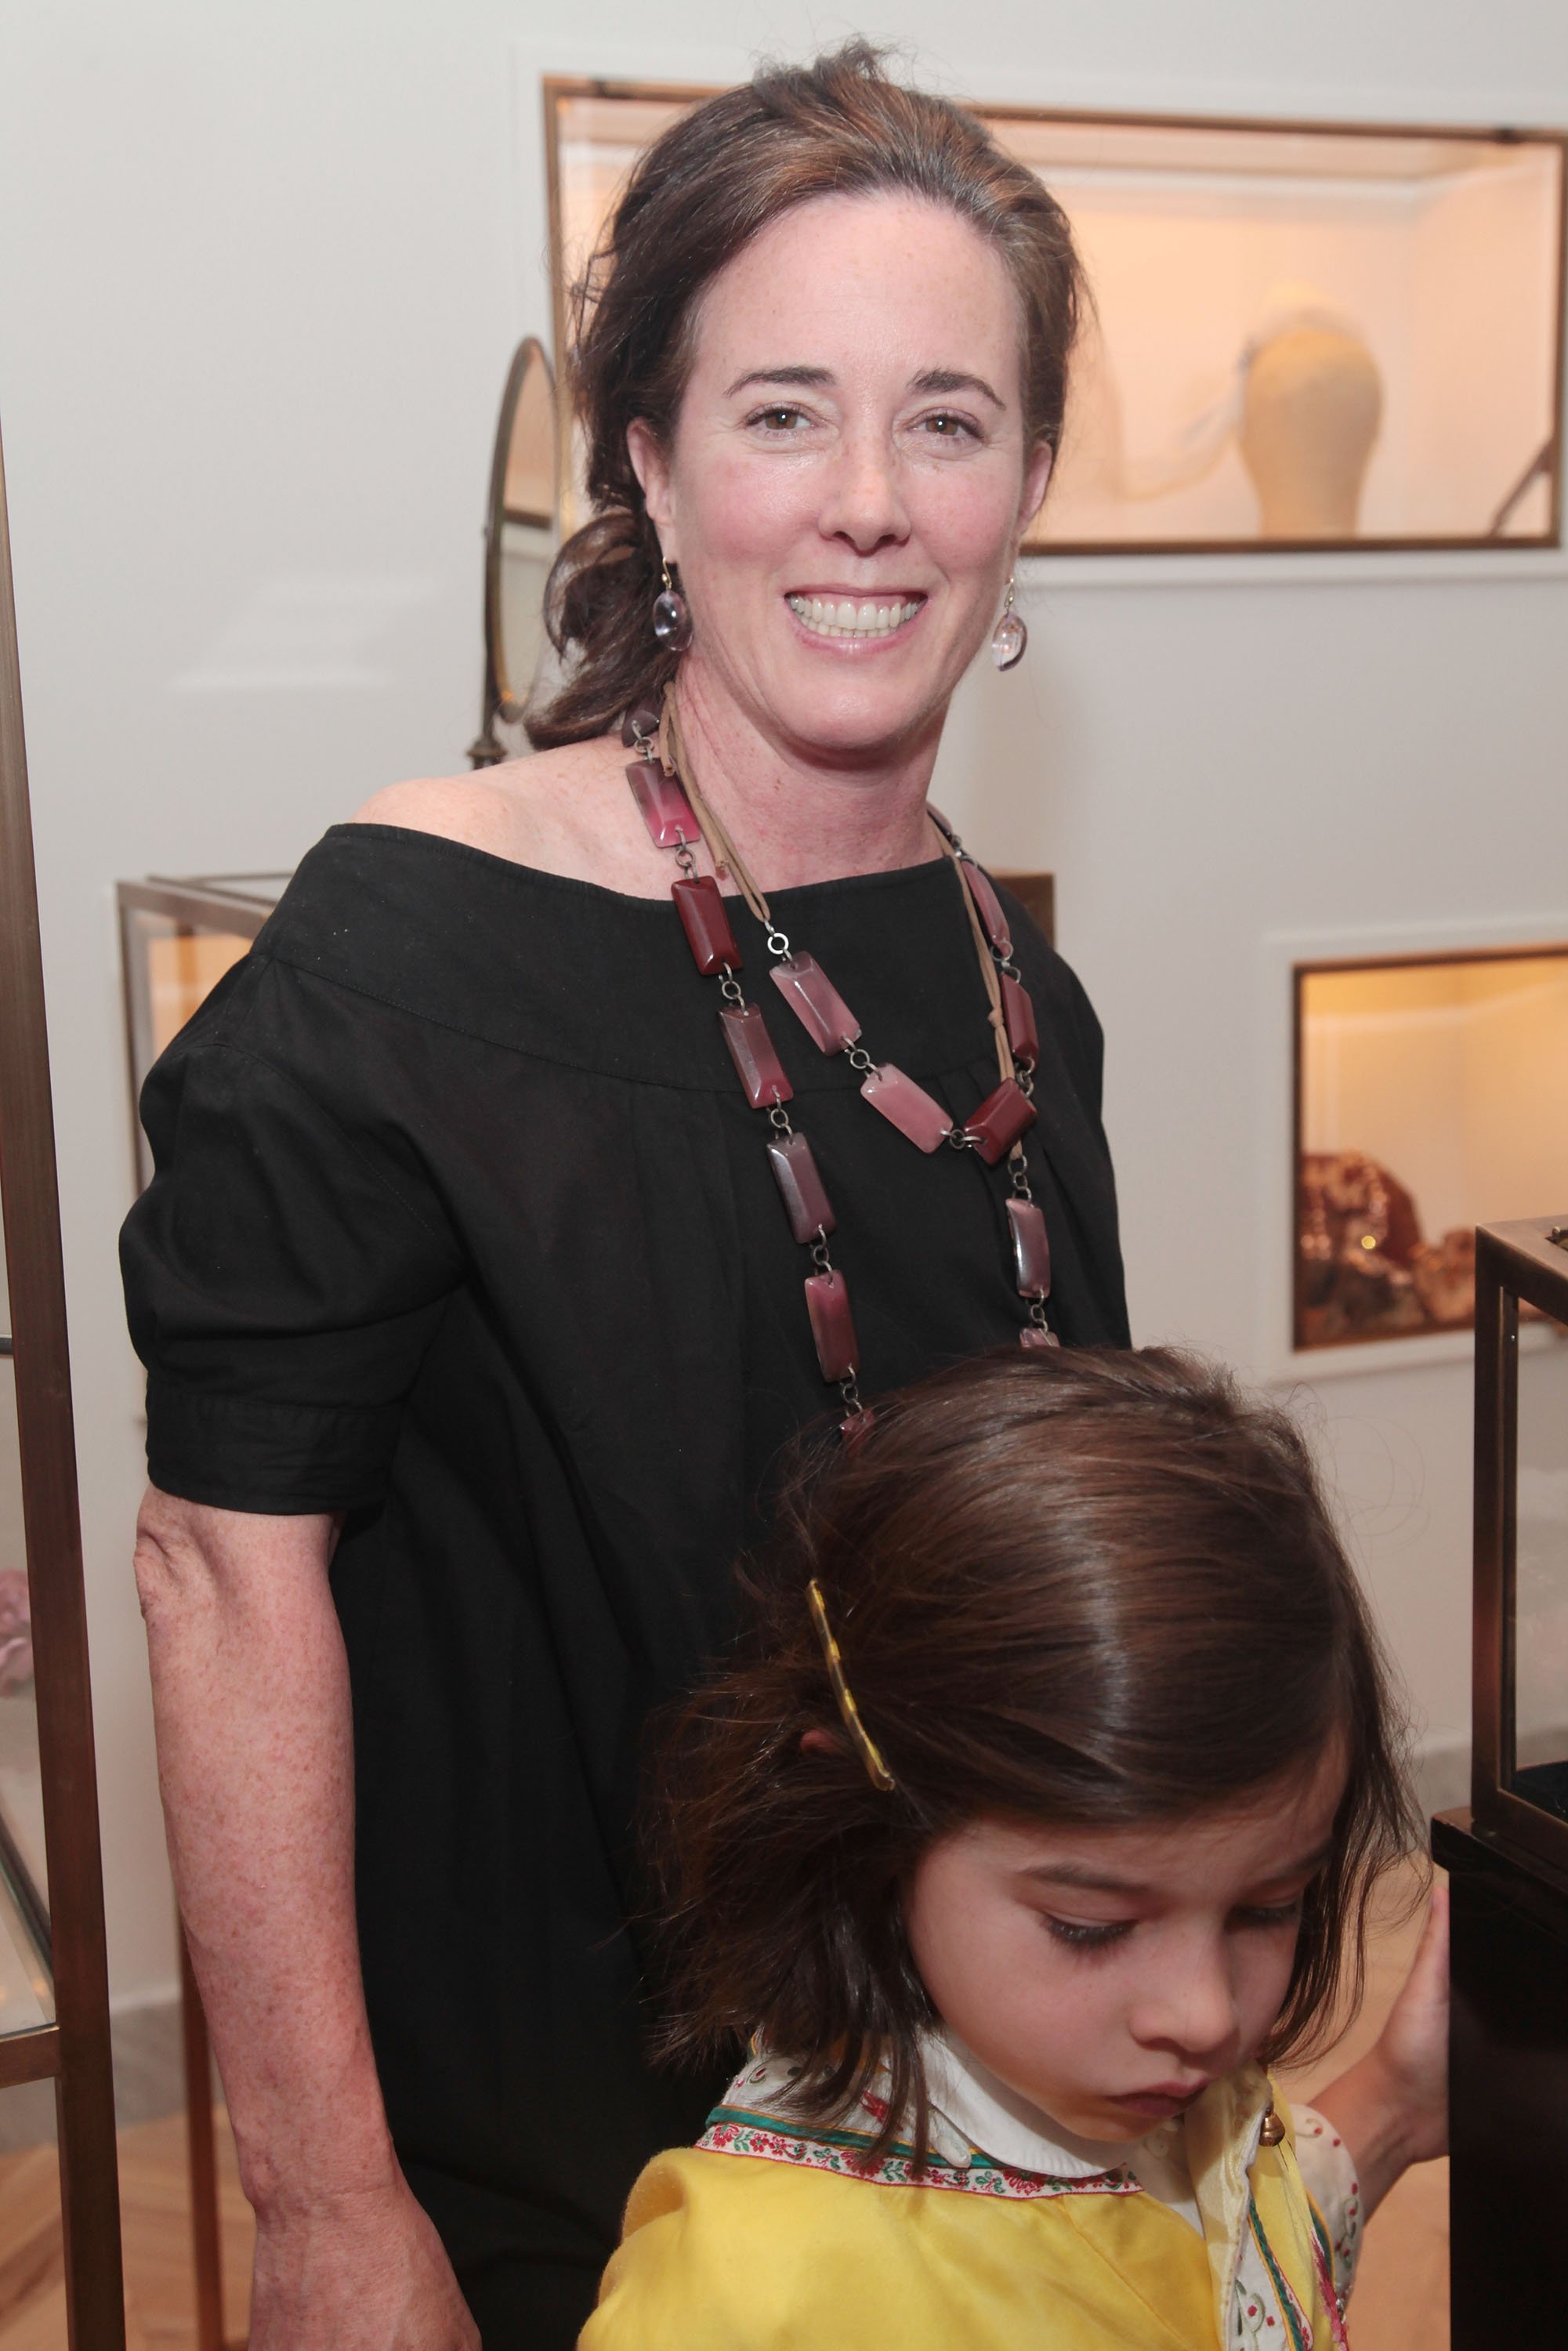 Kate Spade and her daughter Frances Spade at the opening of the J.Crew Bridal Boutique hosted by Darcy Miller at J.Crew Bridal Boutique on June 1, 2010, in New York City. | Source: Getty Images